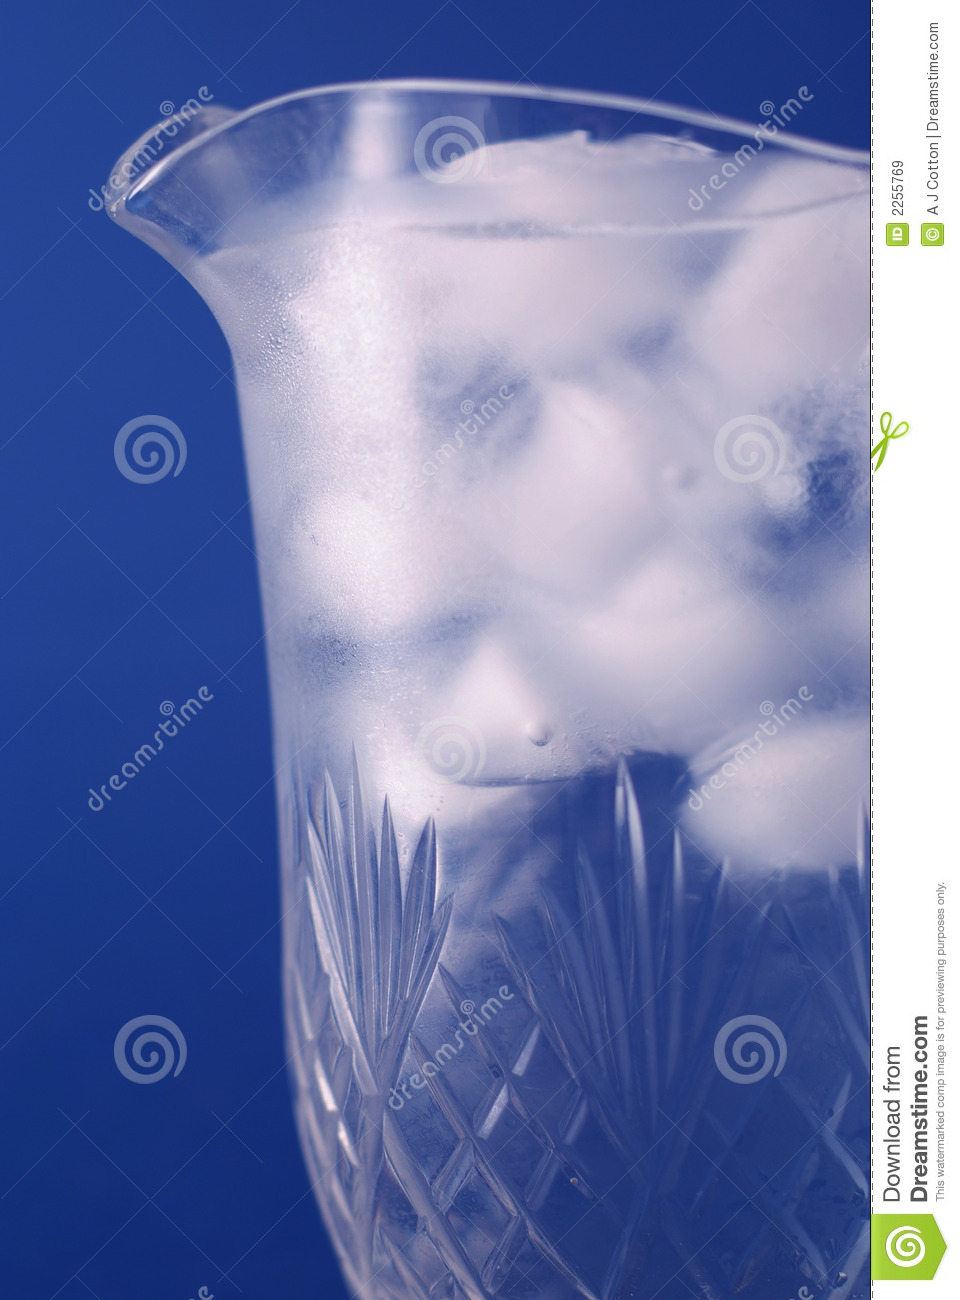 Ice Water In Jug Royalty Free Stock Images   Image  2255769